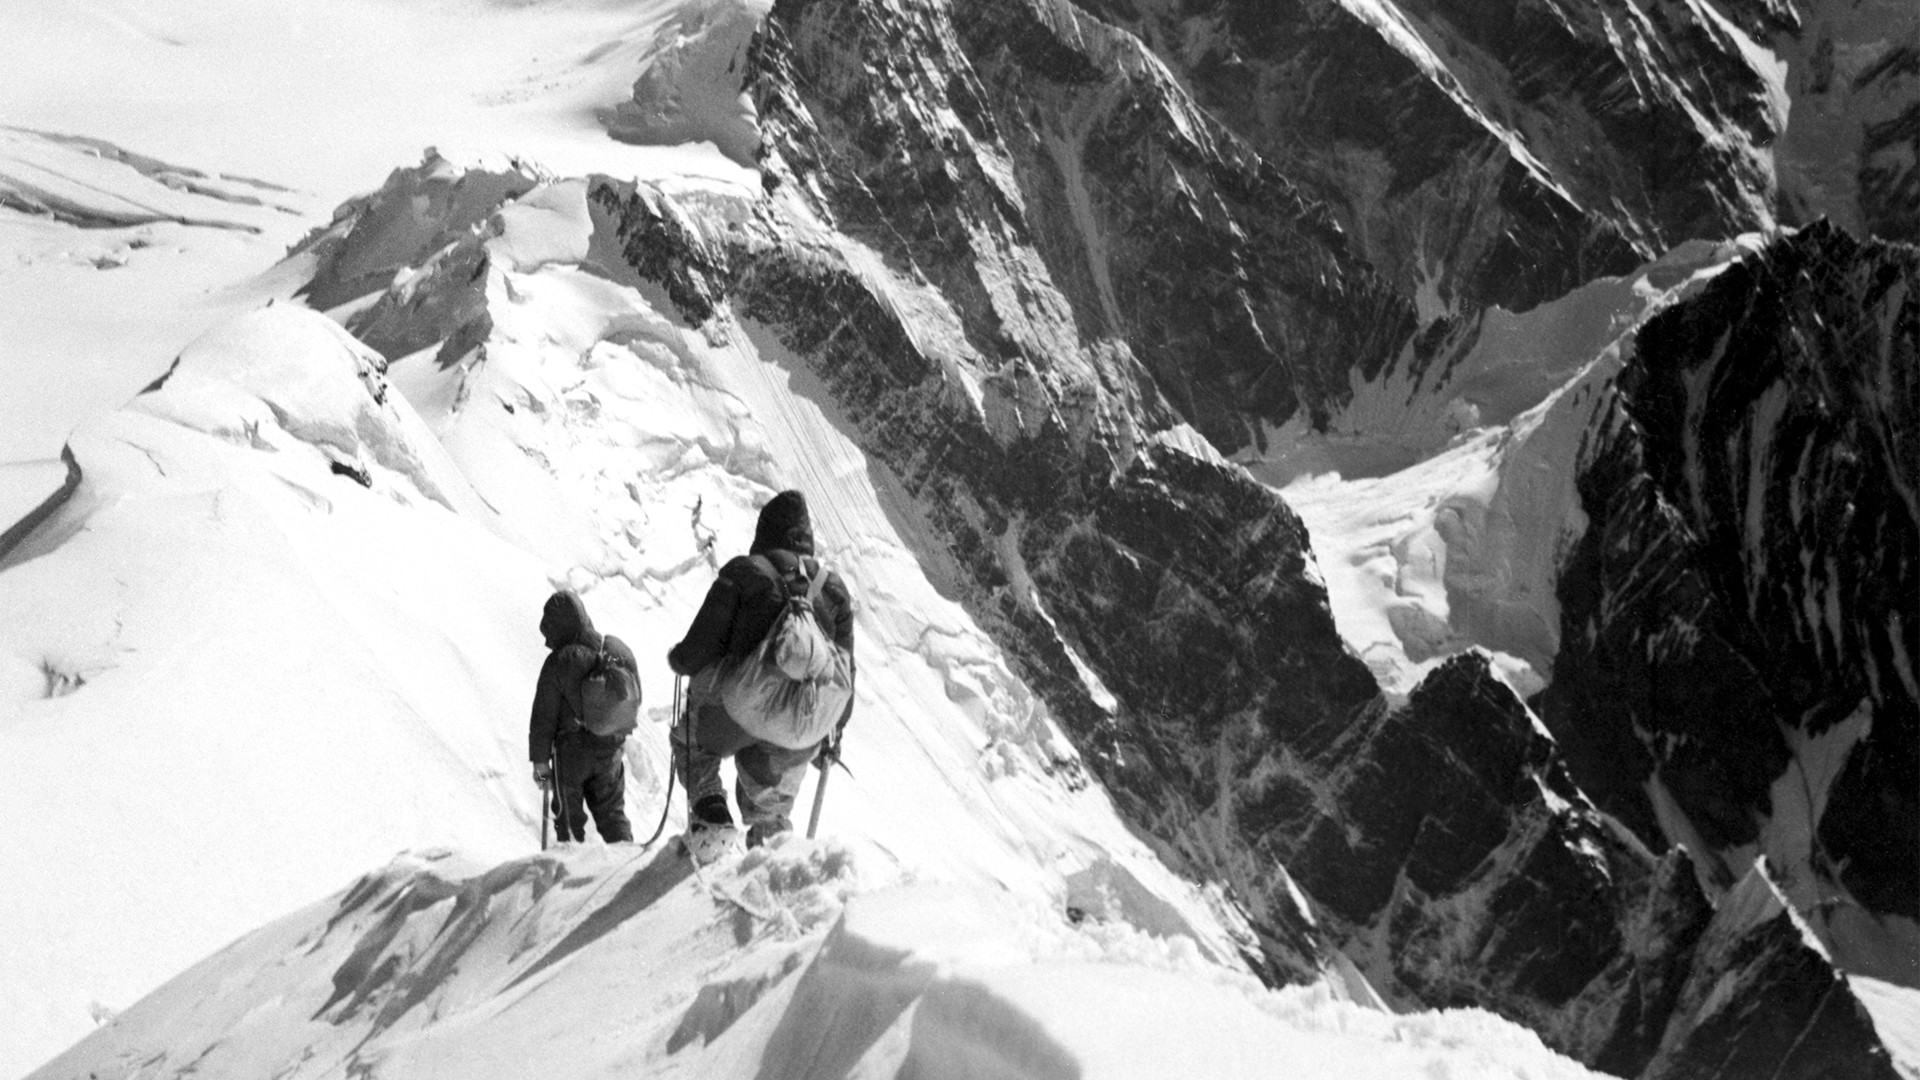 "In 1932 two alpinist groups came across a mysterious peak undocumented by previous expeditions - 7,495 m above sea level."